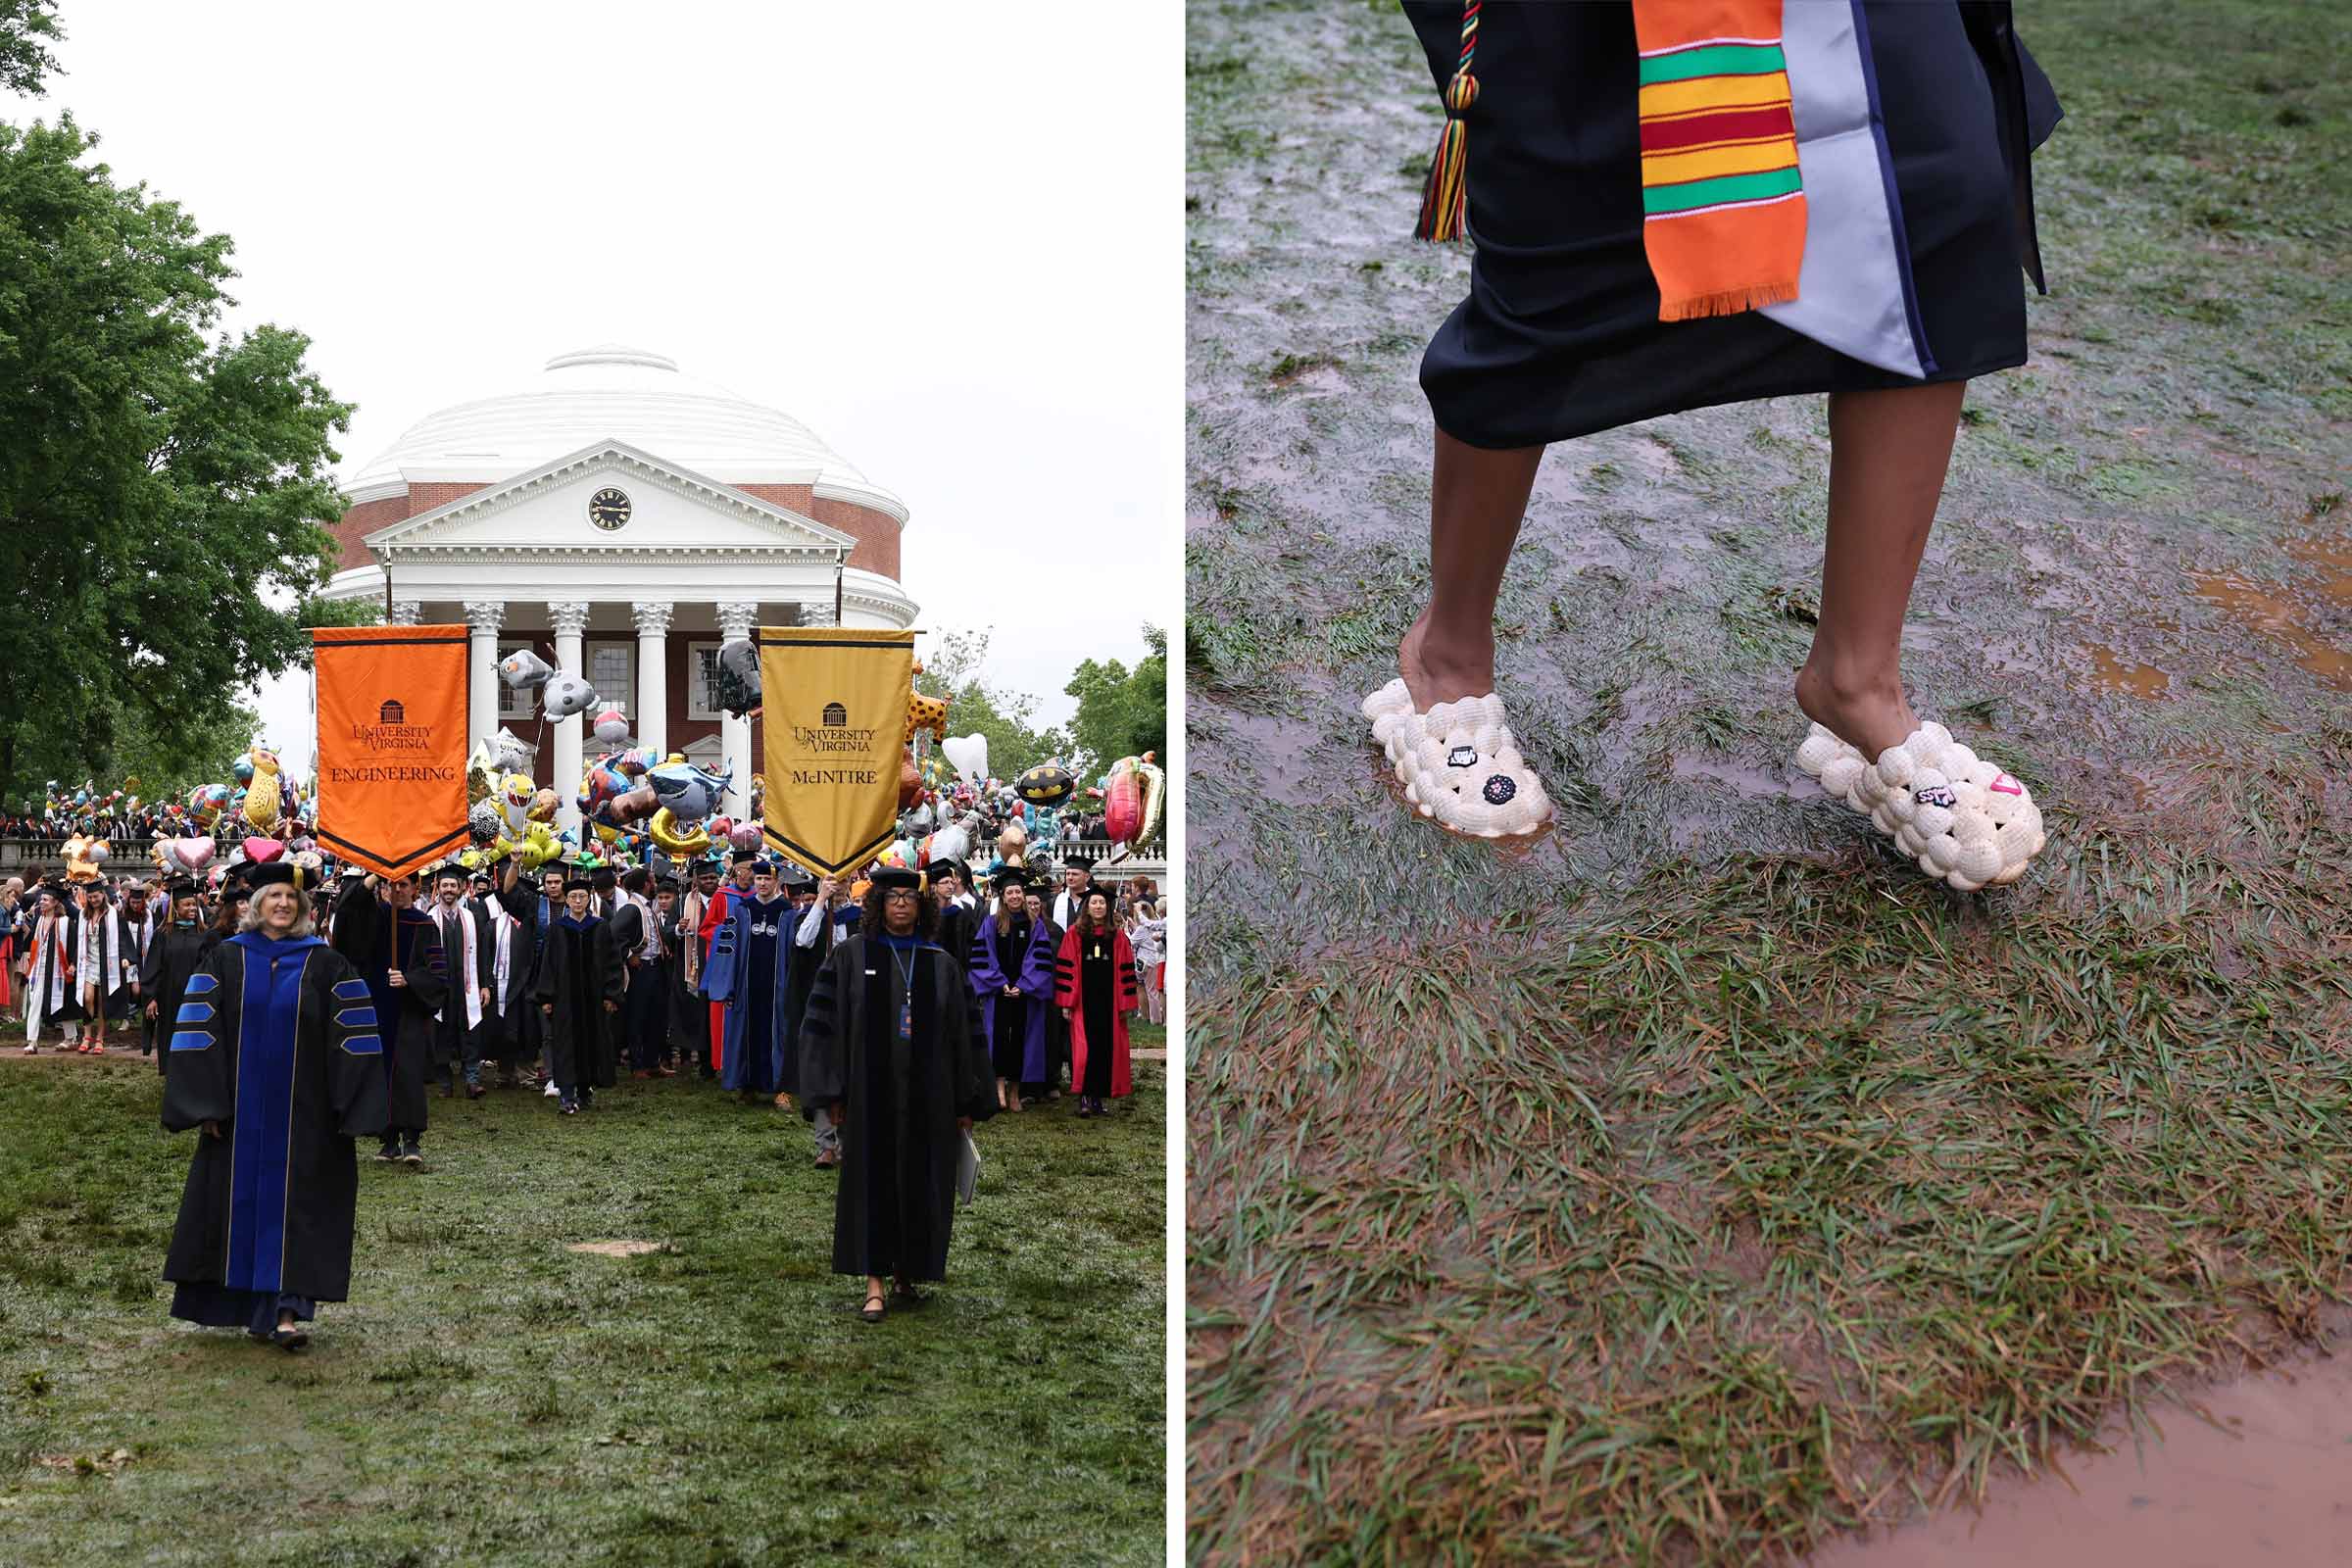 On the left, the beginning of the school processions during final exercises, on the right, croc or flip flop type shoes being sported in the mud by a grad walking during final exercises